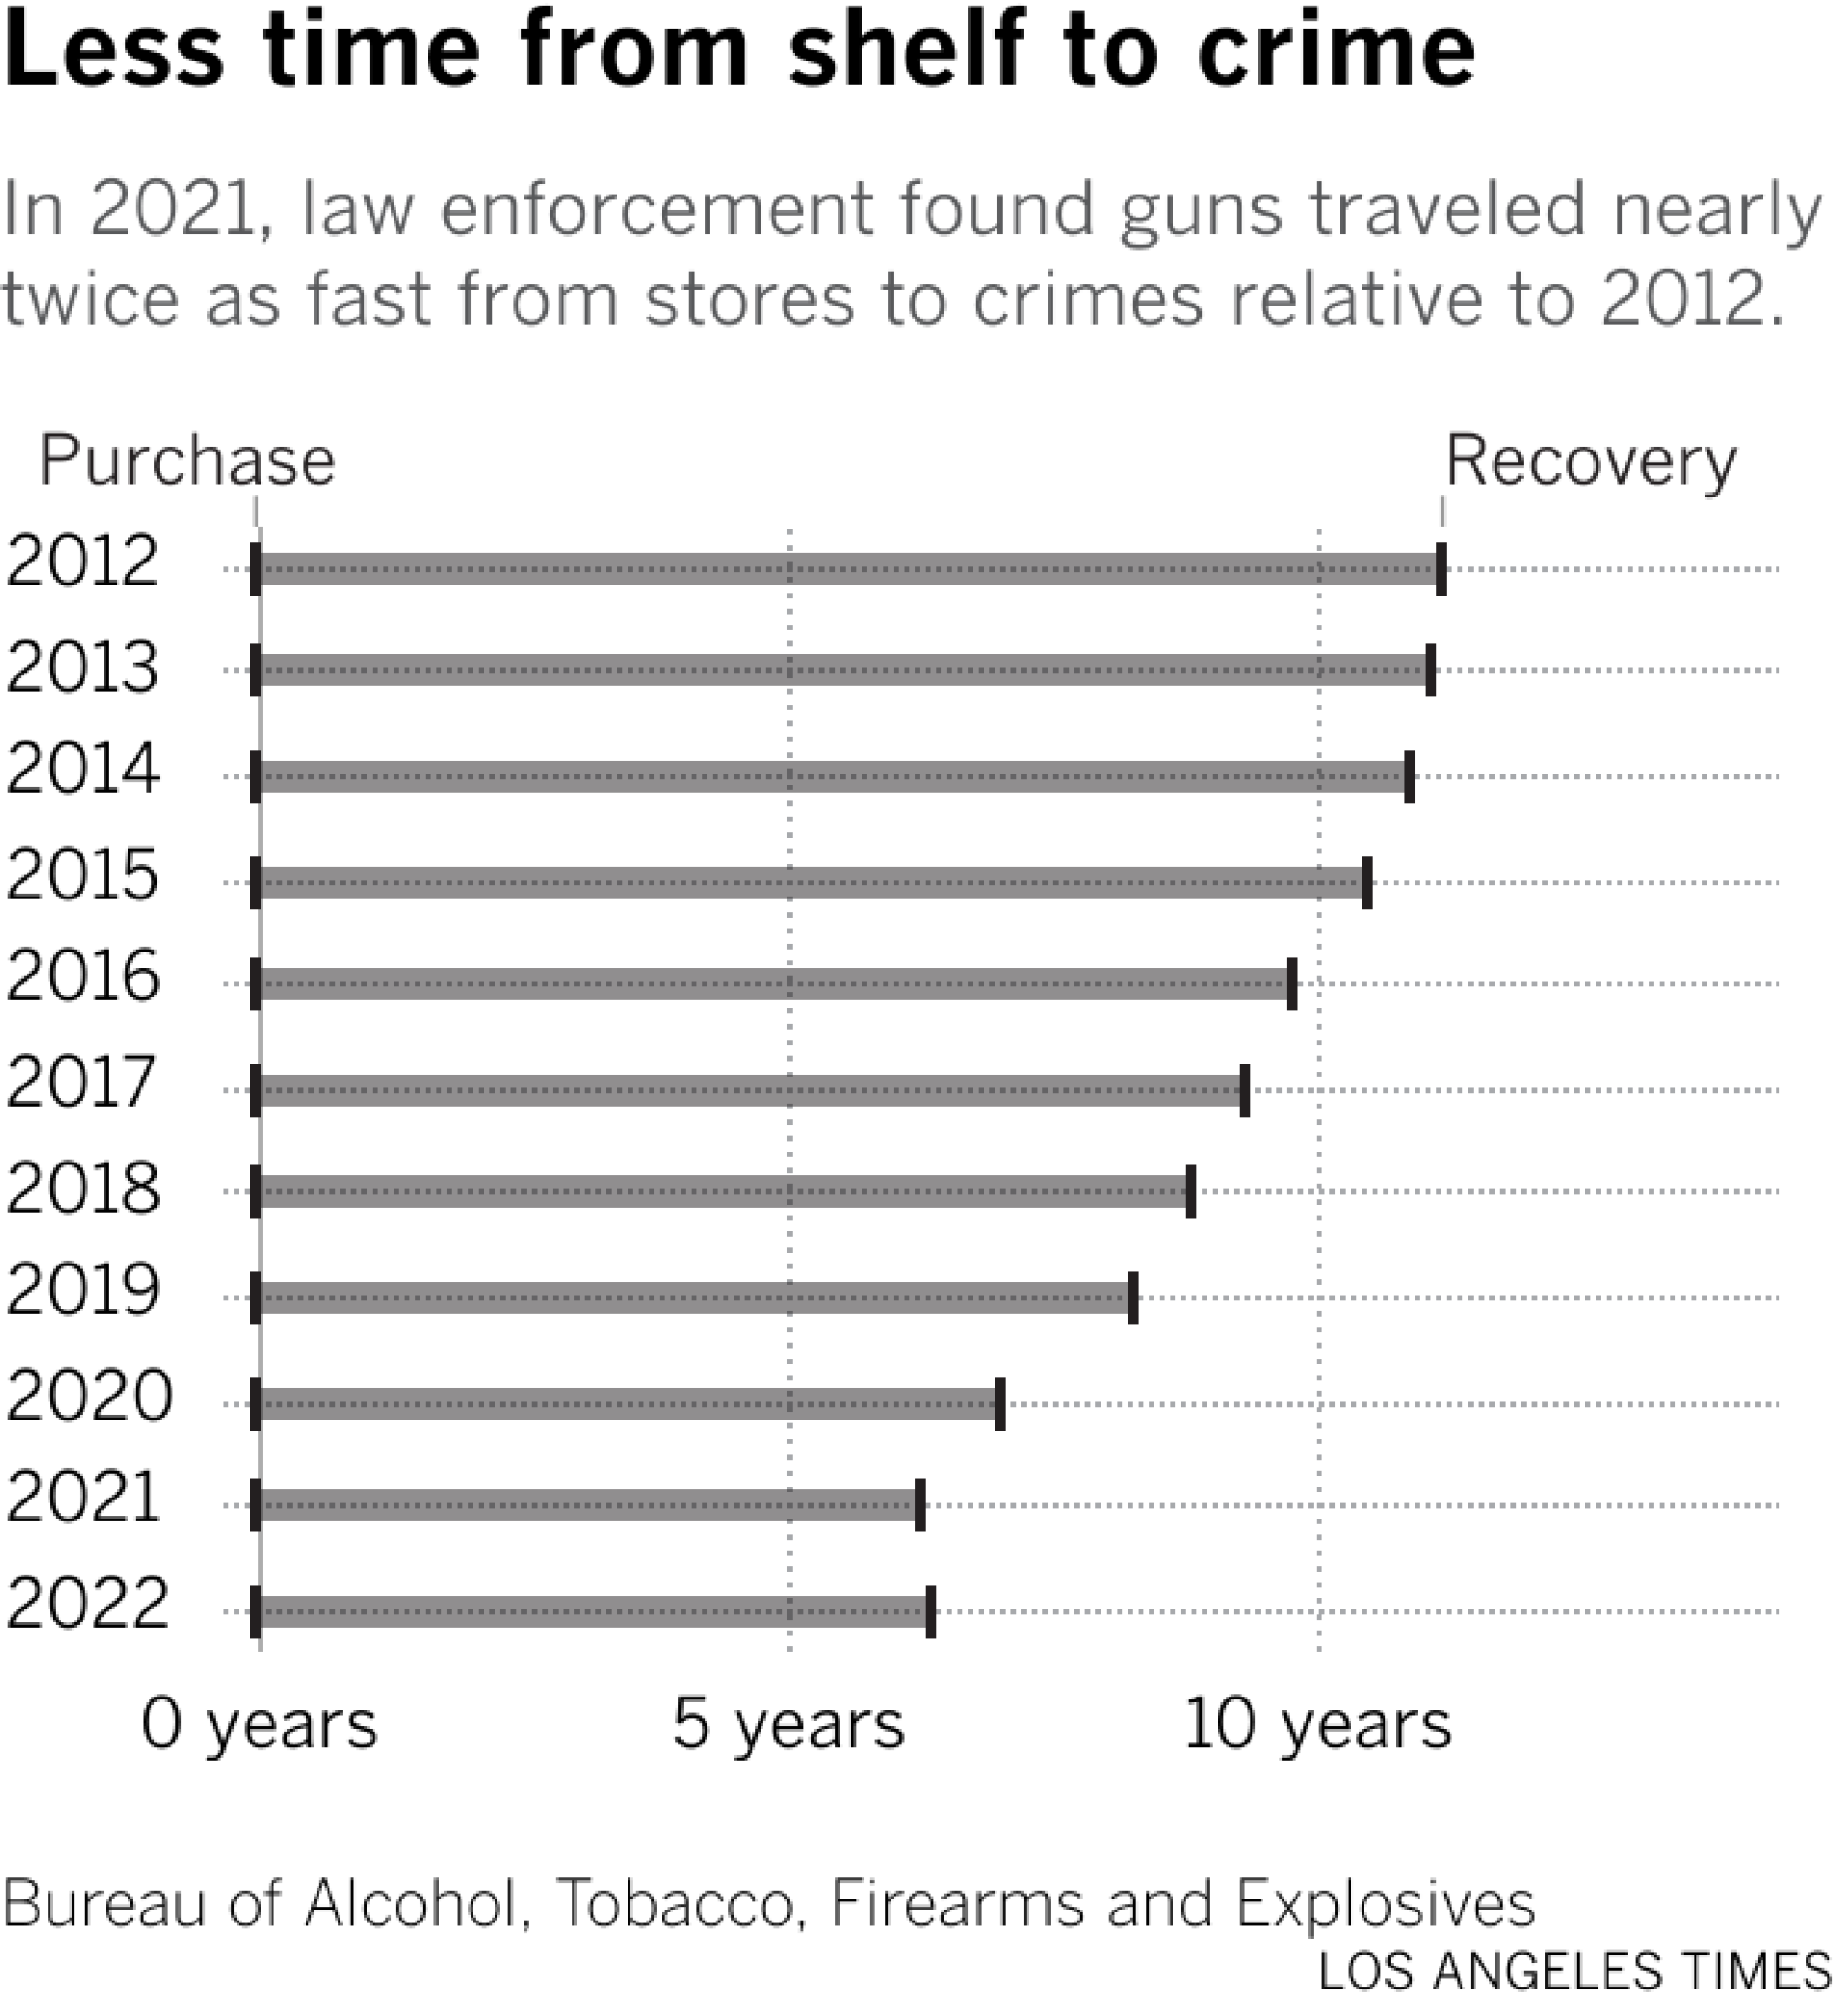 Range plot showing the national average time from a gun's purchase to its recovery by law enforcement in years from 2012 through 2021. In 2012, the average time was 11 years. By 2021, it fell to 6.